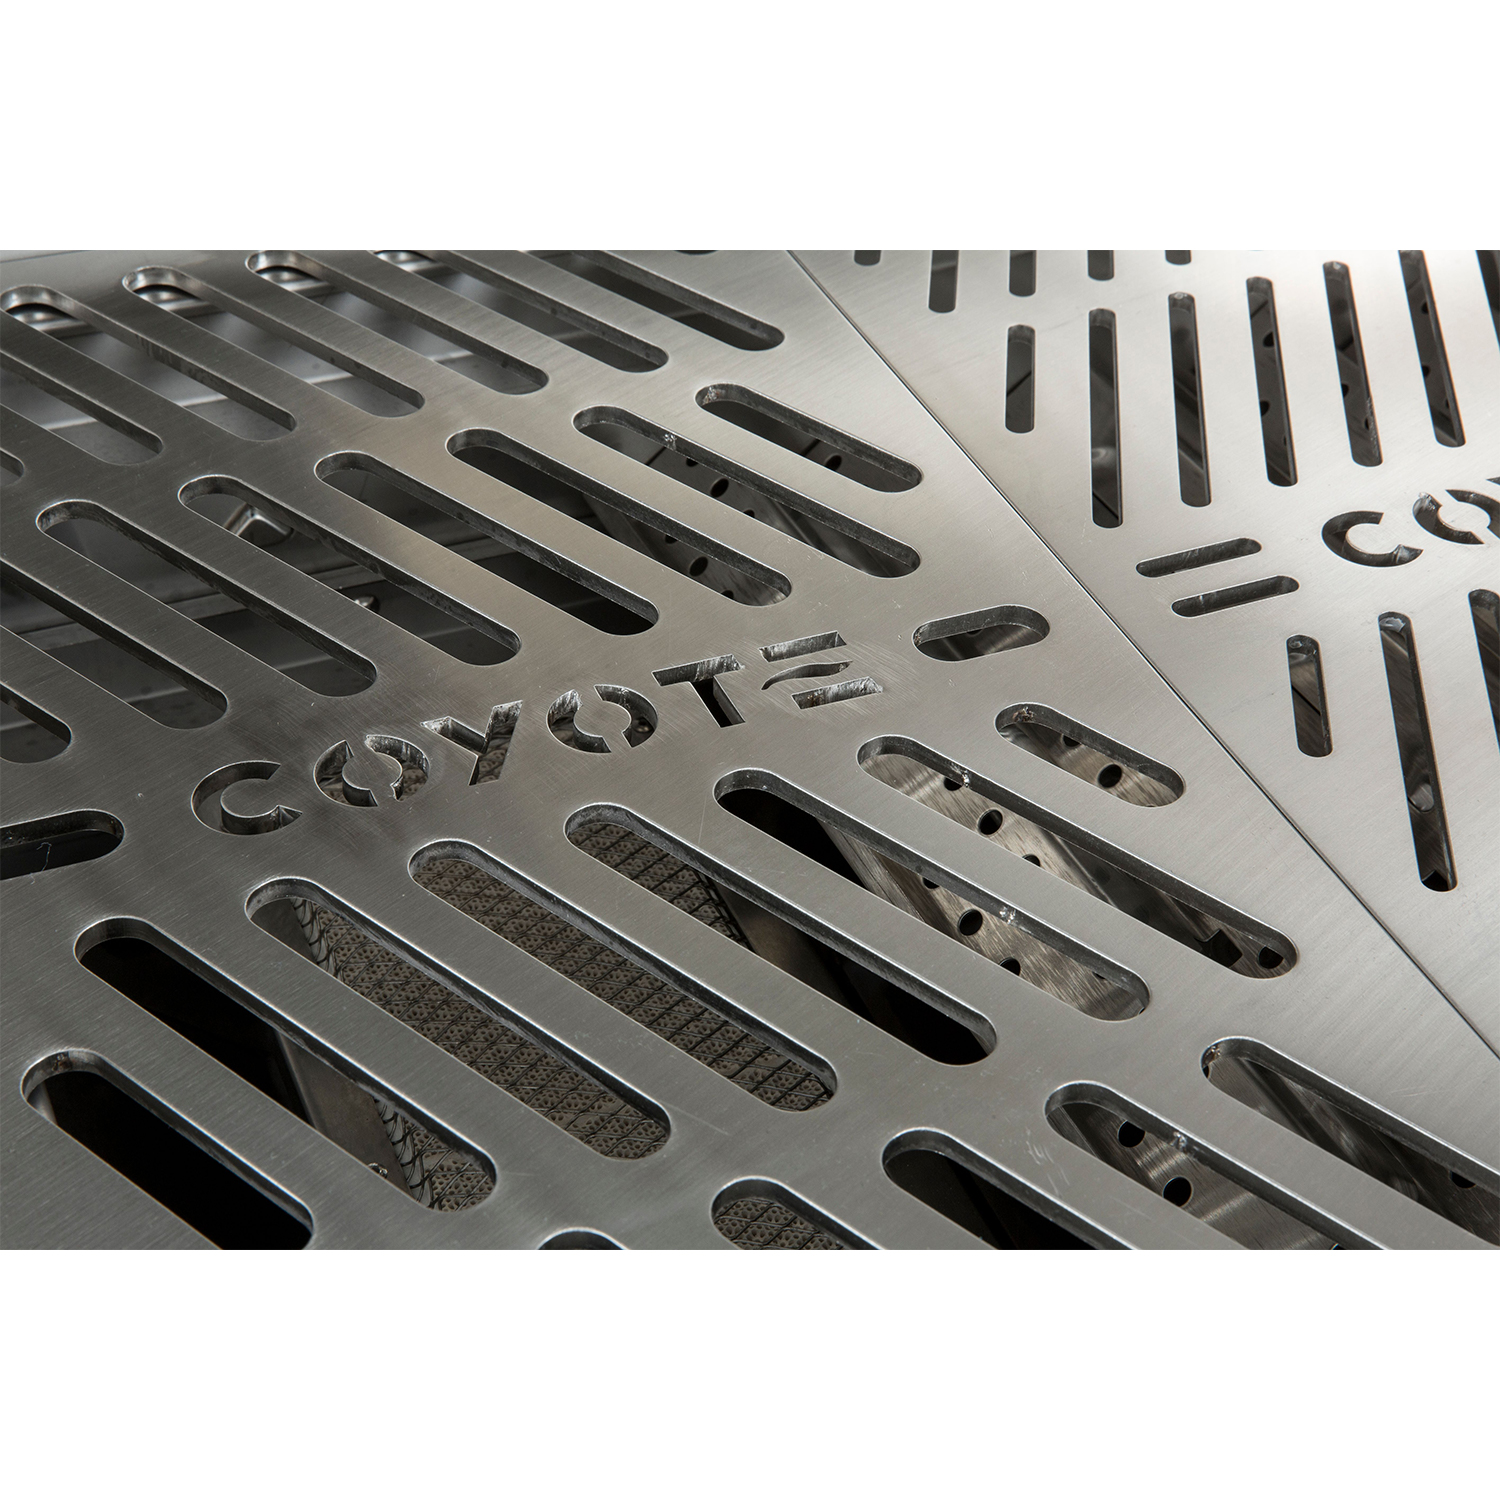 Coyote Signature Stainless Steel Laser Cut BBQ Grill Grates, Set of 3 - image 5 of 5